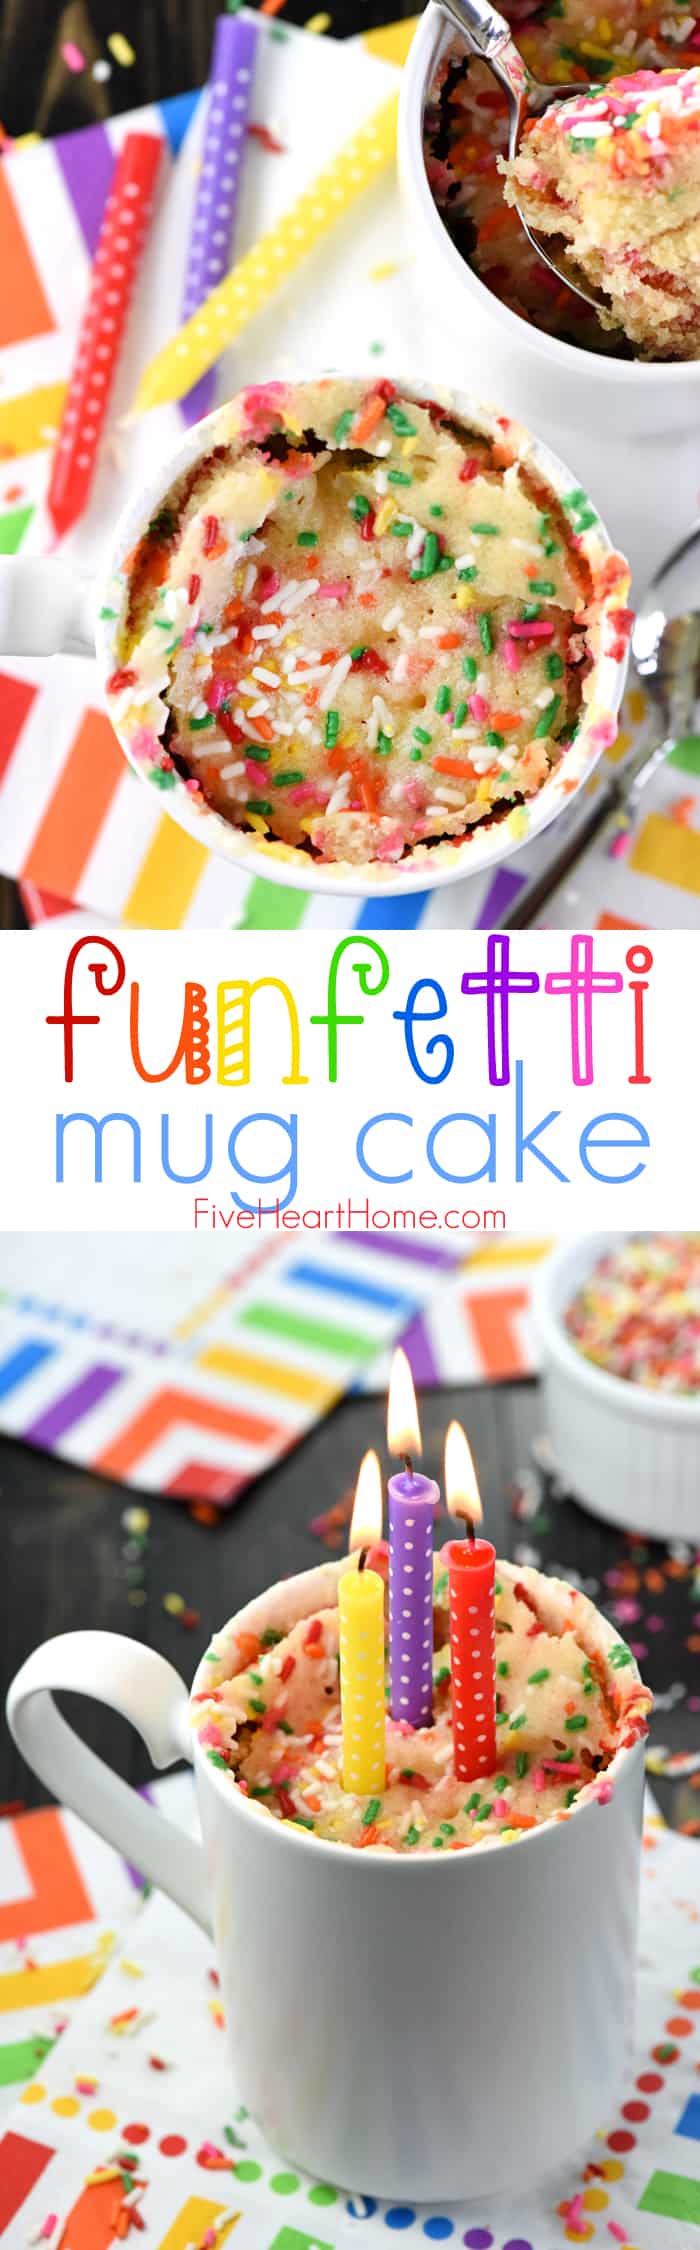 Funfetti Mug Cake ~ this single-serving microwave mug cake recipe comes together in just a few minutes and yields light, fluffy, vanilla cake -- bursting with colorful sprinkles, and perfect for a birthday, anniversary, or any celebration! | FiveHeartHome.com via @fivehearthome